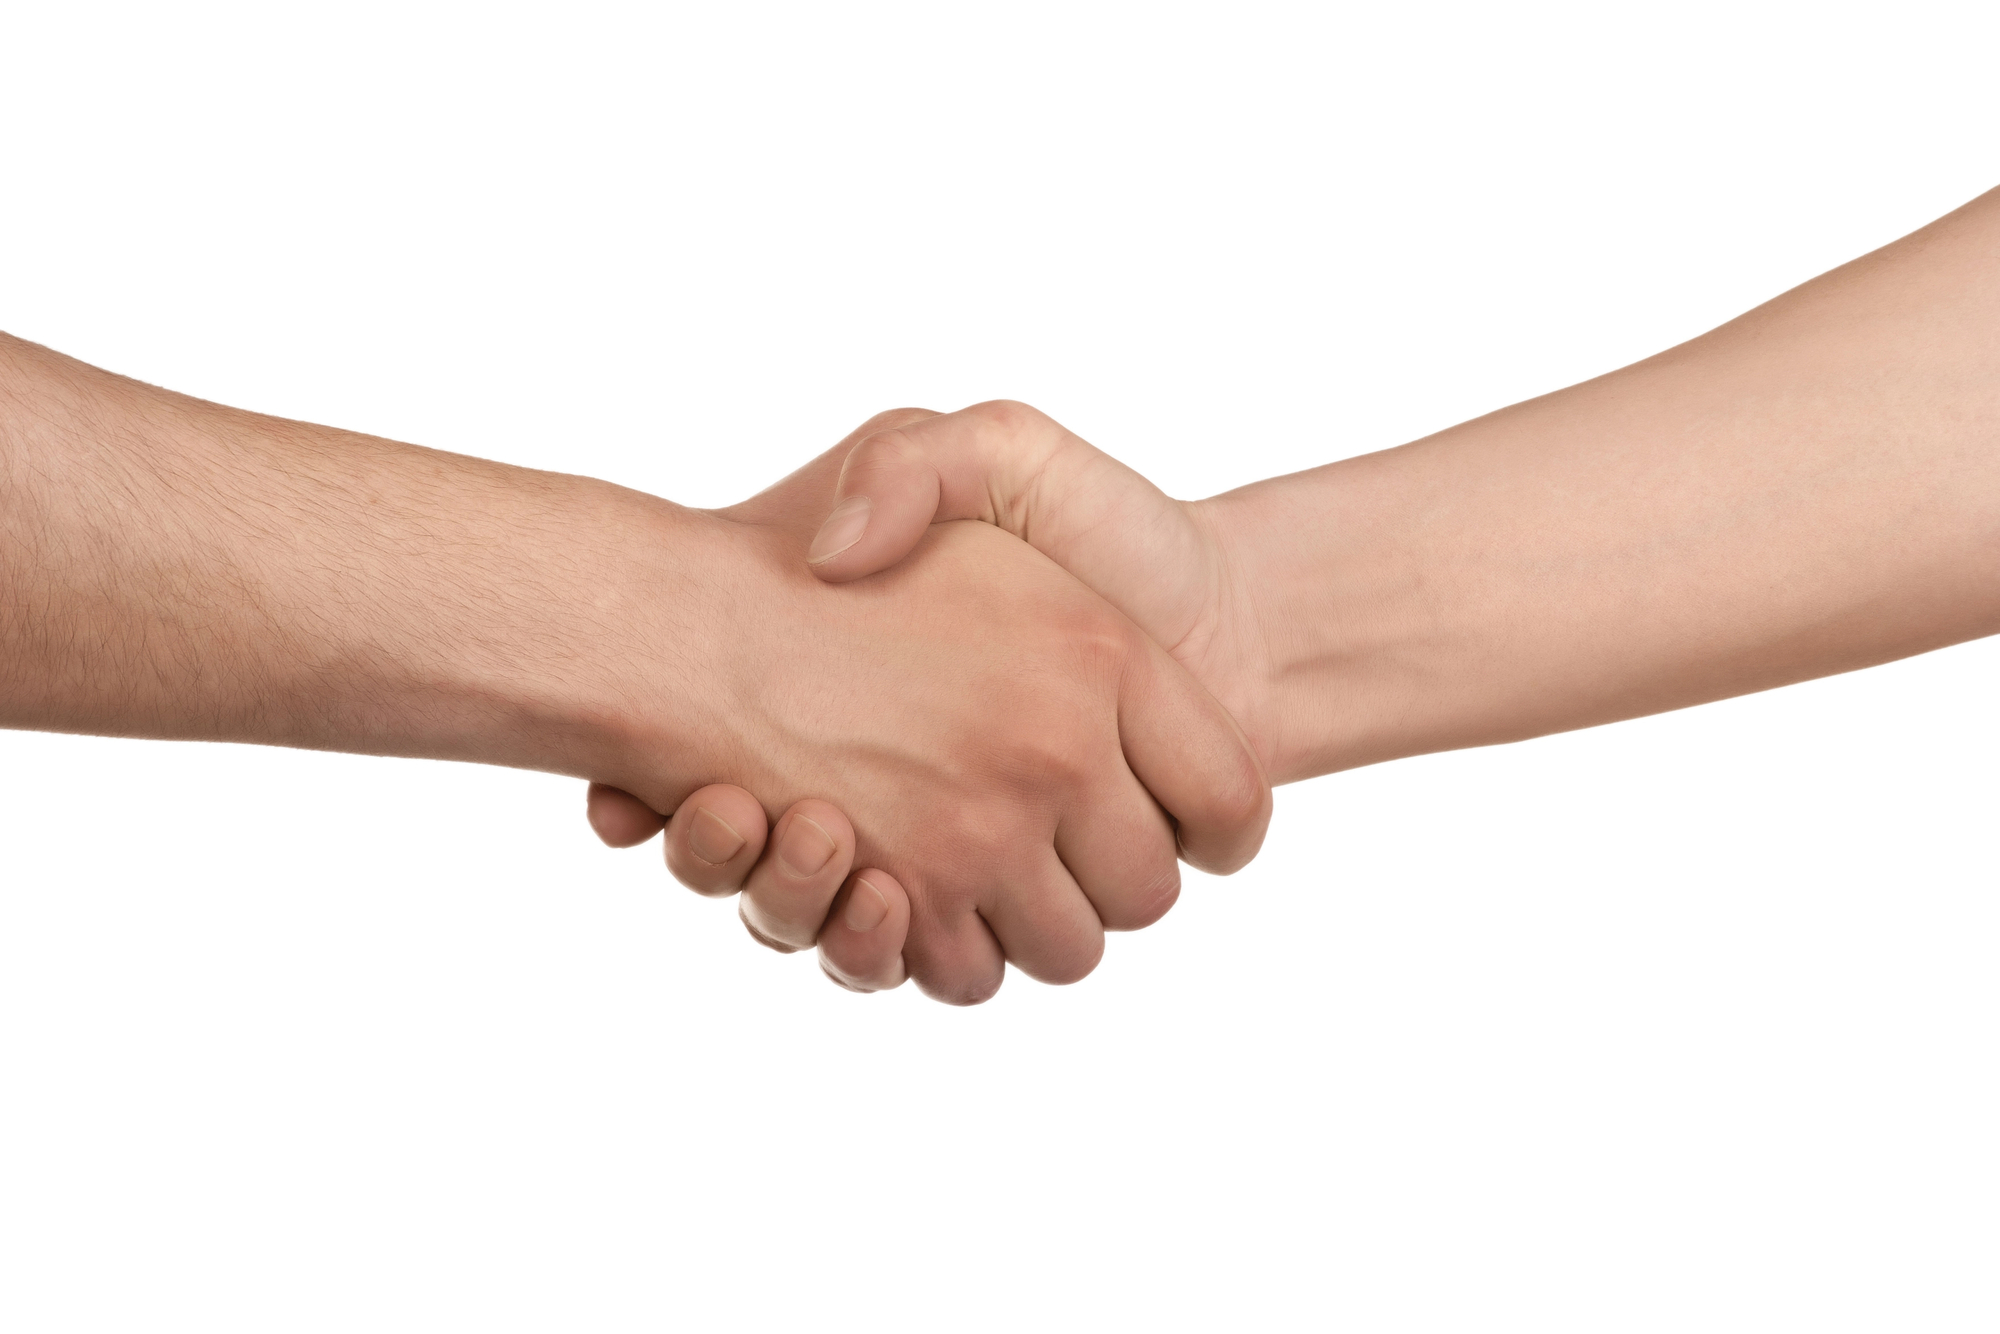 two people shaking hands